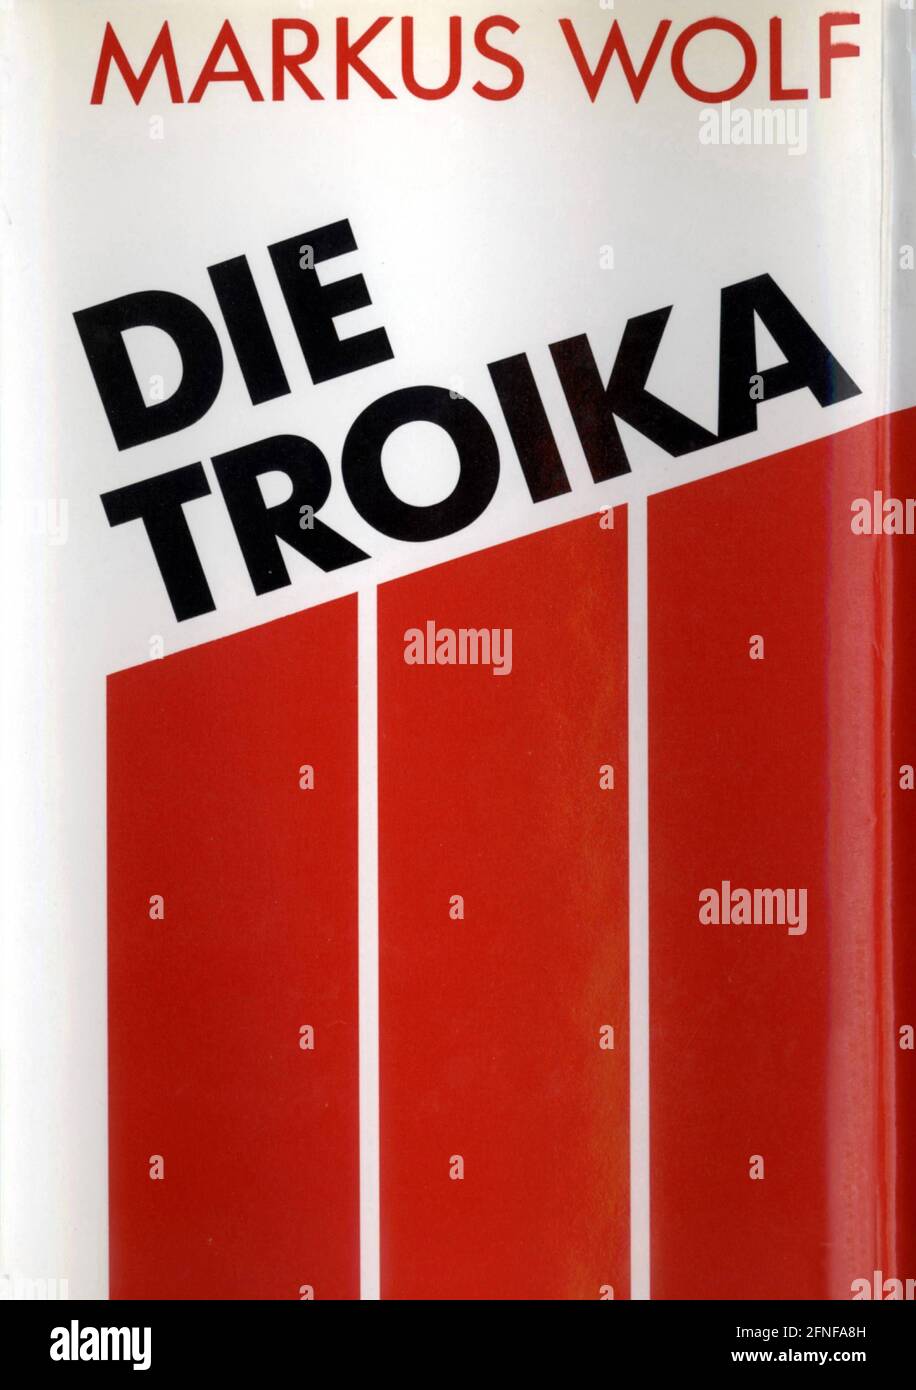 Date of recording: 02.06.1997 Title page of the book 'Die Troika' (The Troika), published in spring 1989 by the former GDR spy chief Markus Wolf. The book tells the friendship and experiences of three emigrant families, one of which is the Wolf family, and which surprised at the end of the GDR by its critical openness regarding the past. [automated translation] Stock Photo